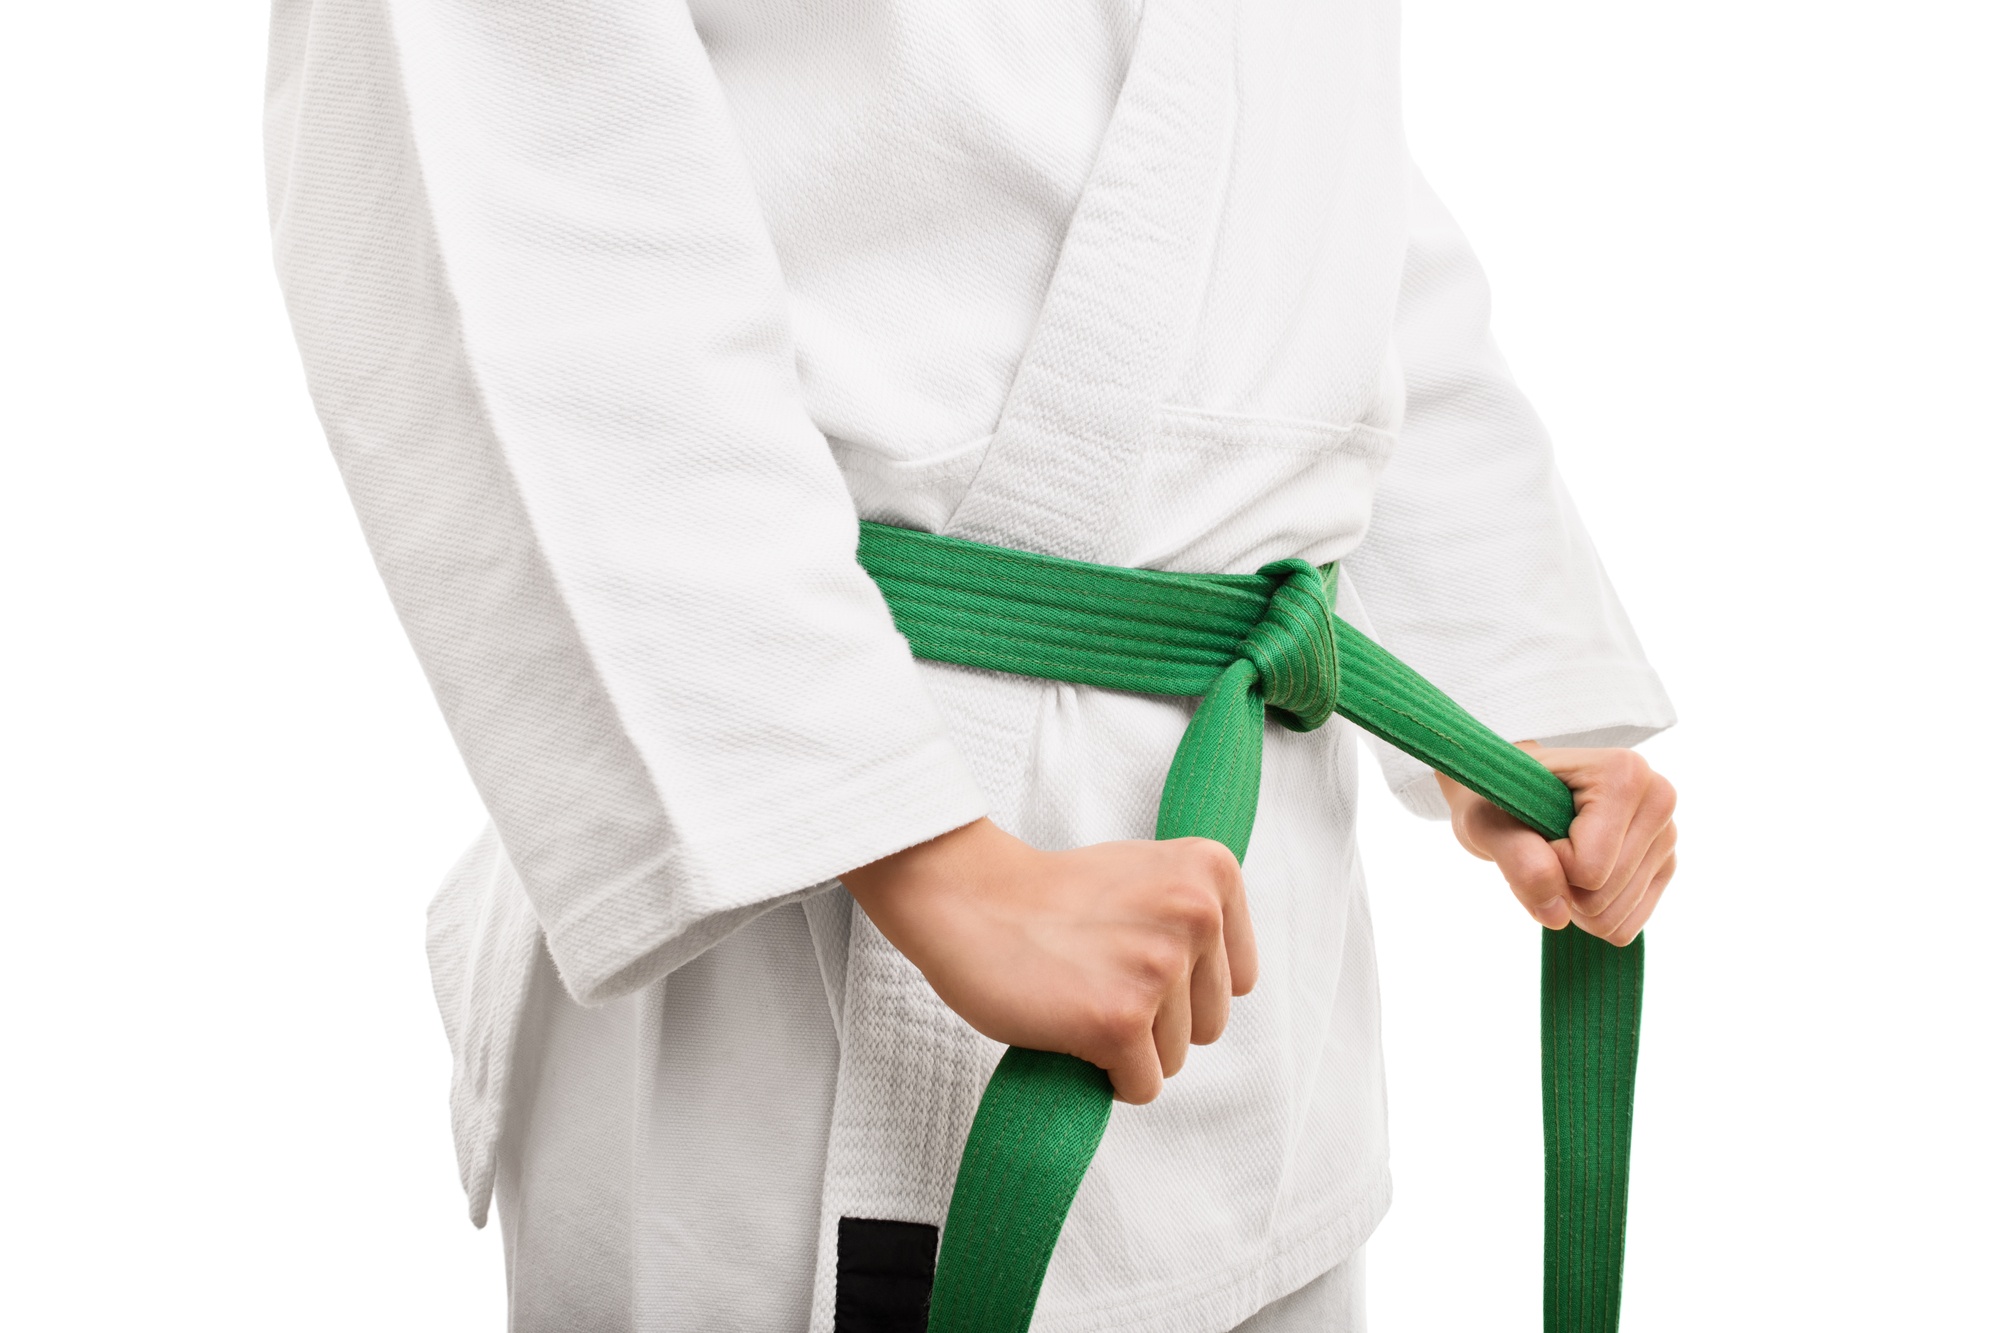 How To Tie A Martial Arts Belt Quick and Practical Guide